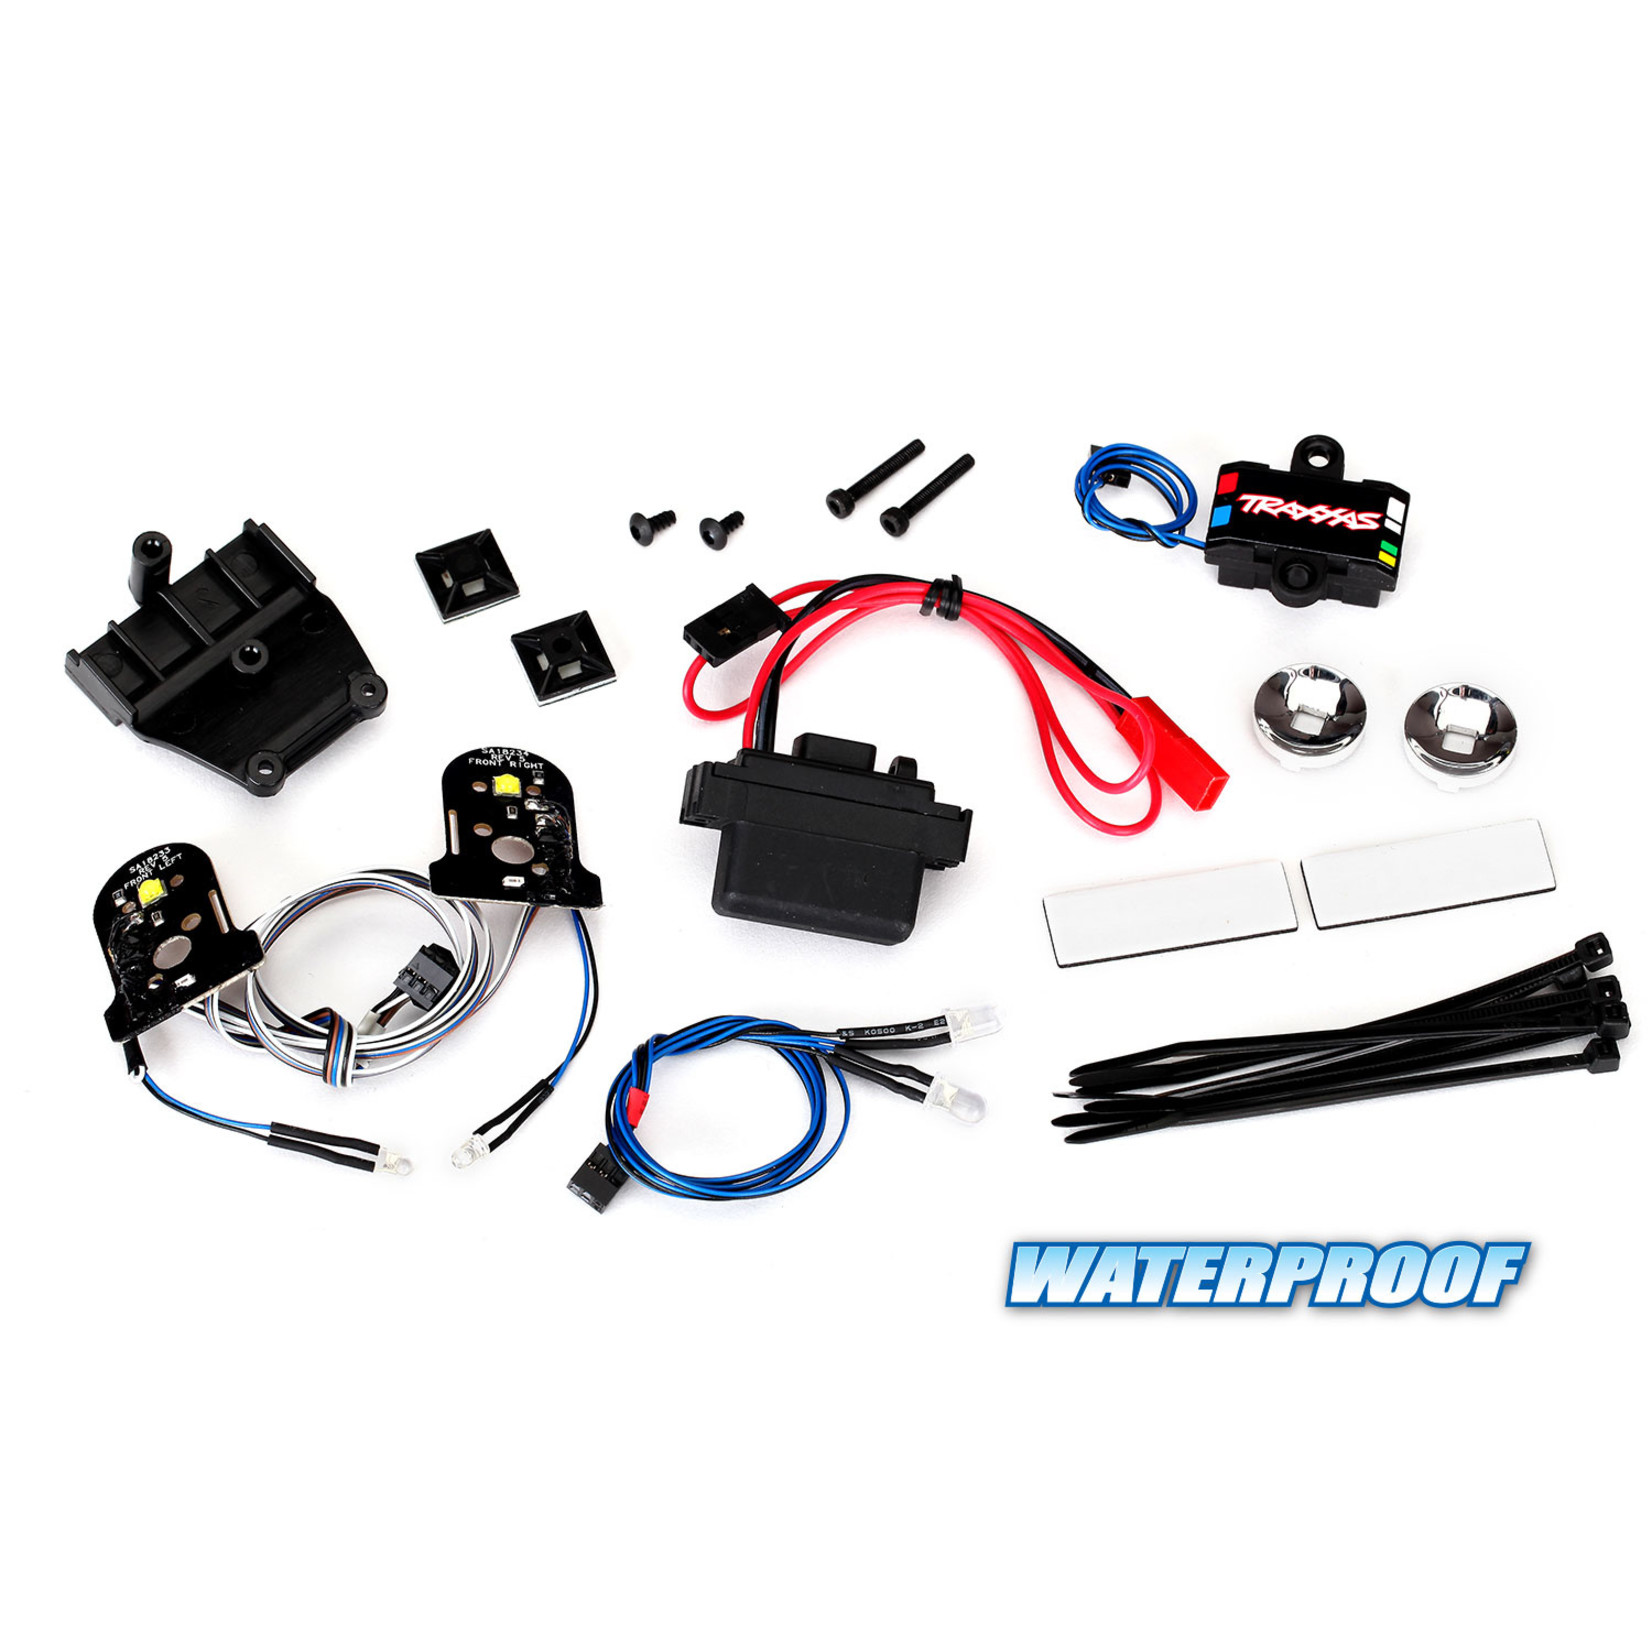 Traxxas 8038 LED light set, complete with power supply (contains headlights, tail lights, side marker lights, distribution block, and power supply) (fits #8130 body)